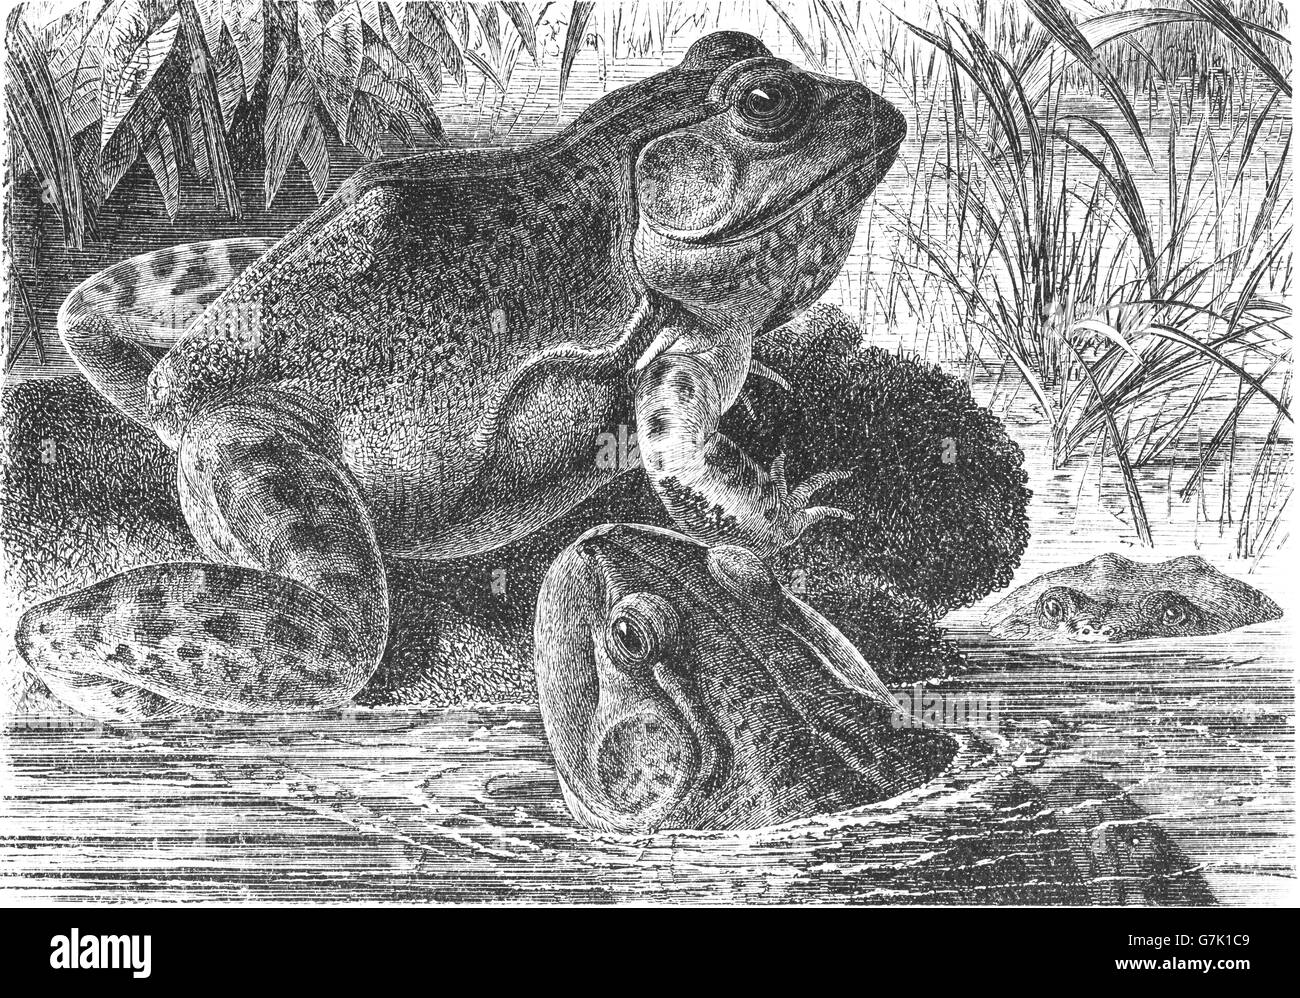 American bullfrog, Lithobates catesbeianus, illustration from book dated 1904 Stock Photo